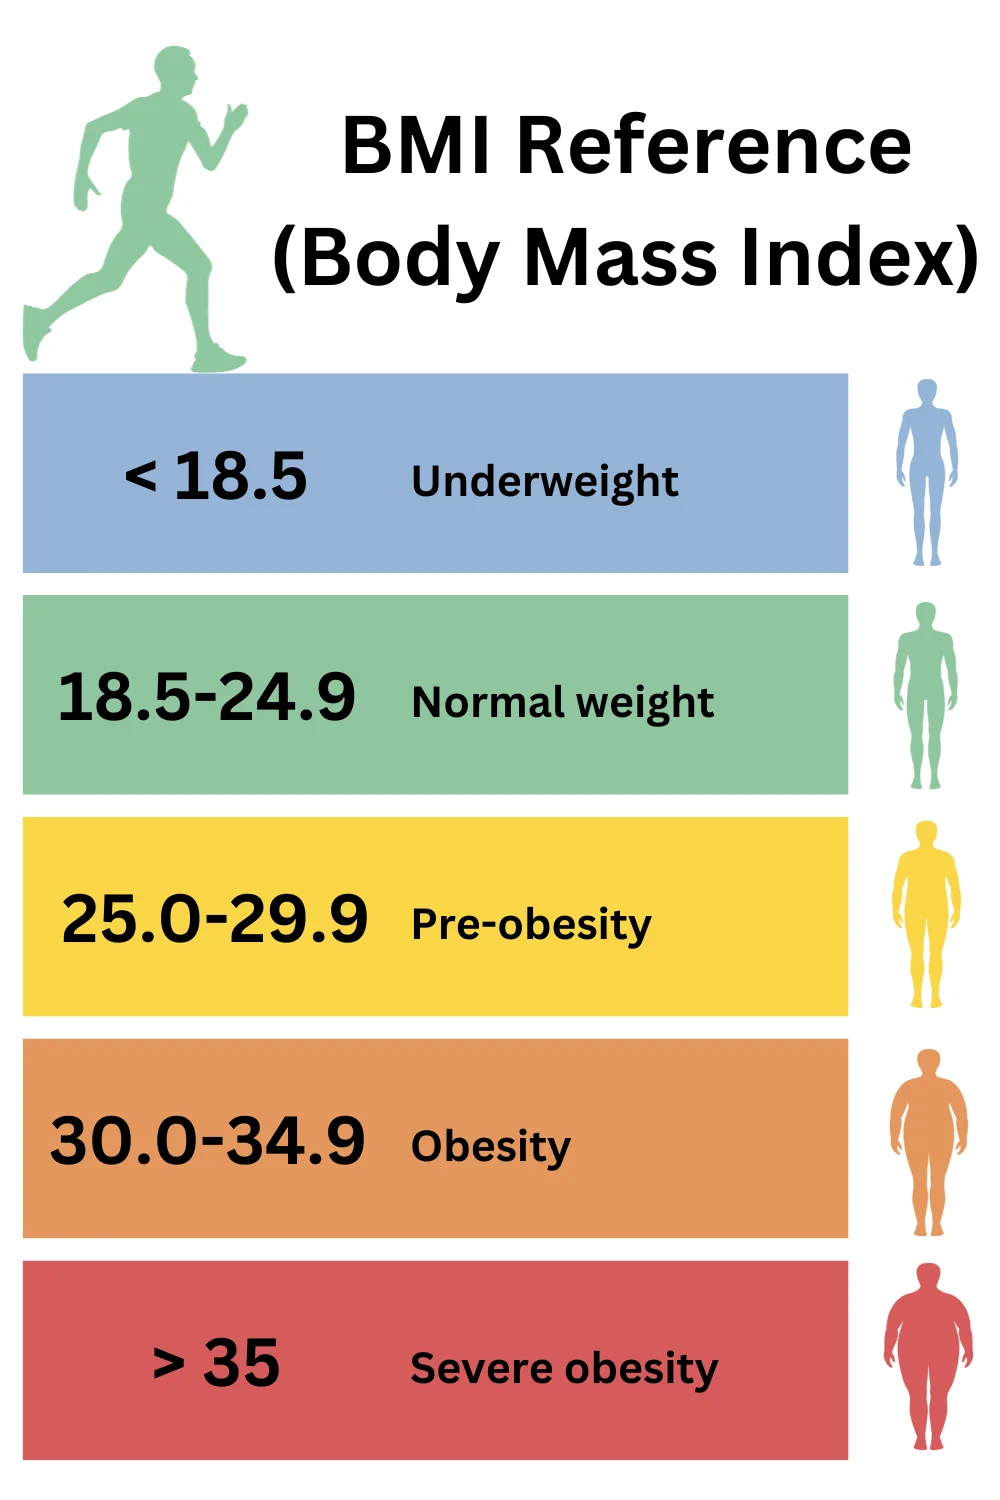 Diagram showing the BMI classifications